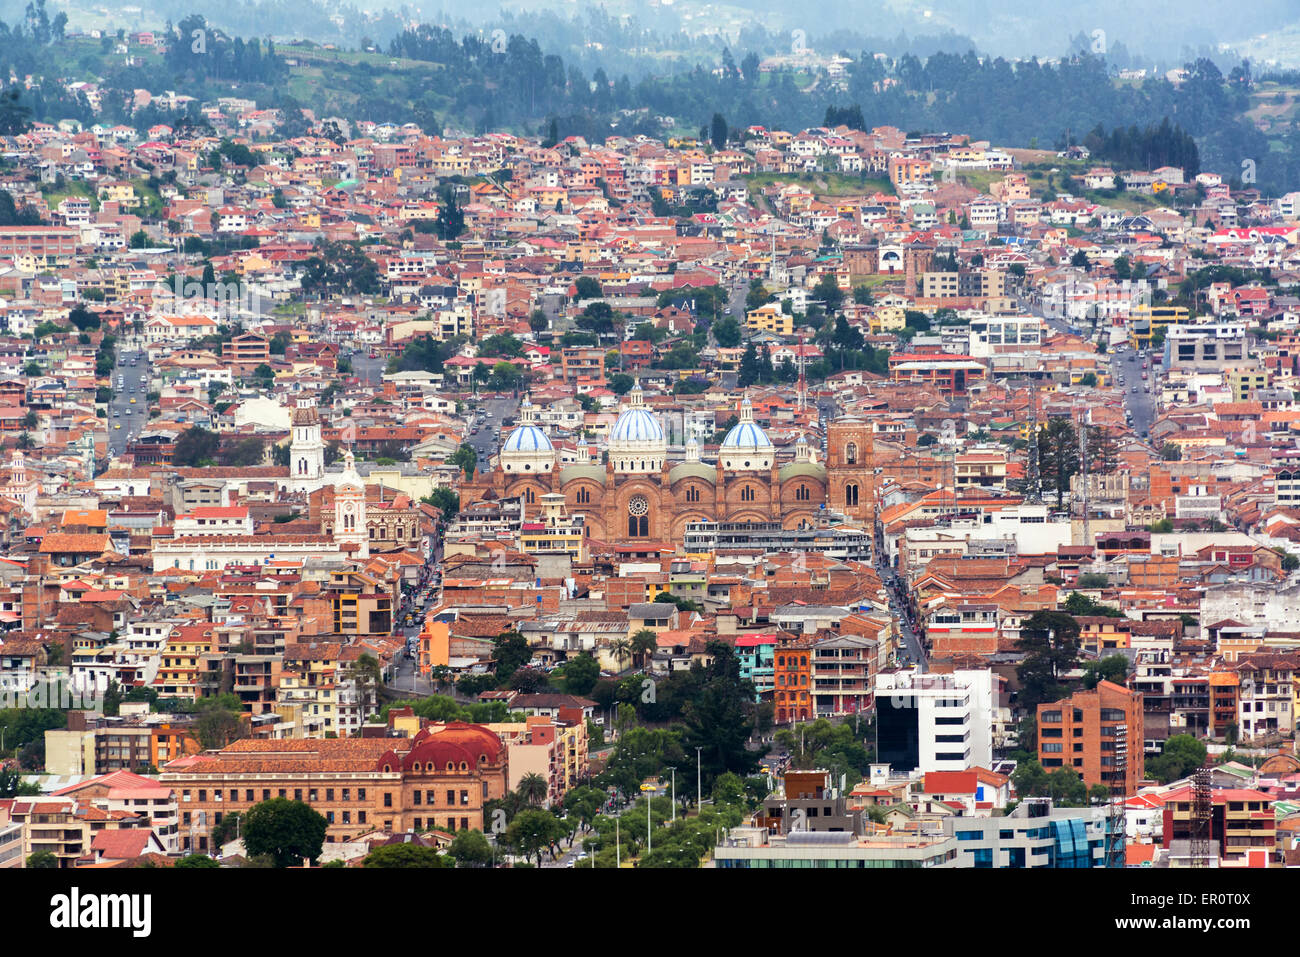 Cityscape of Cuenca, Ecuador with the cathedral in the center of the picture Stock Photo